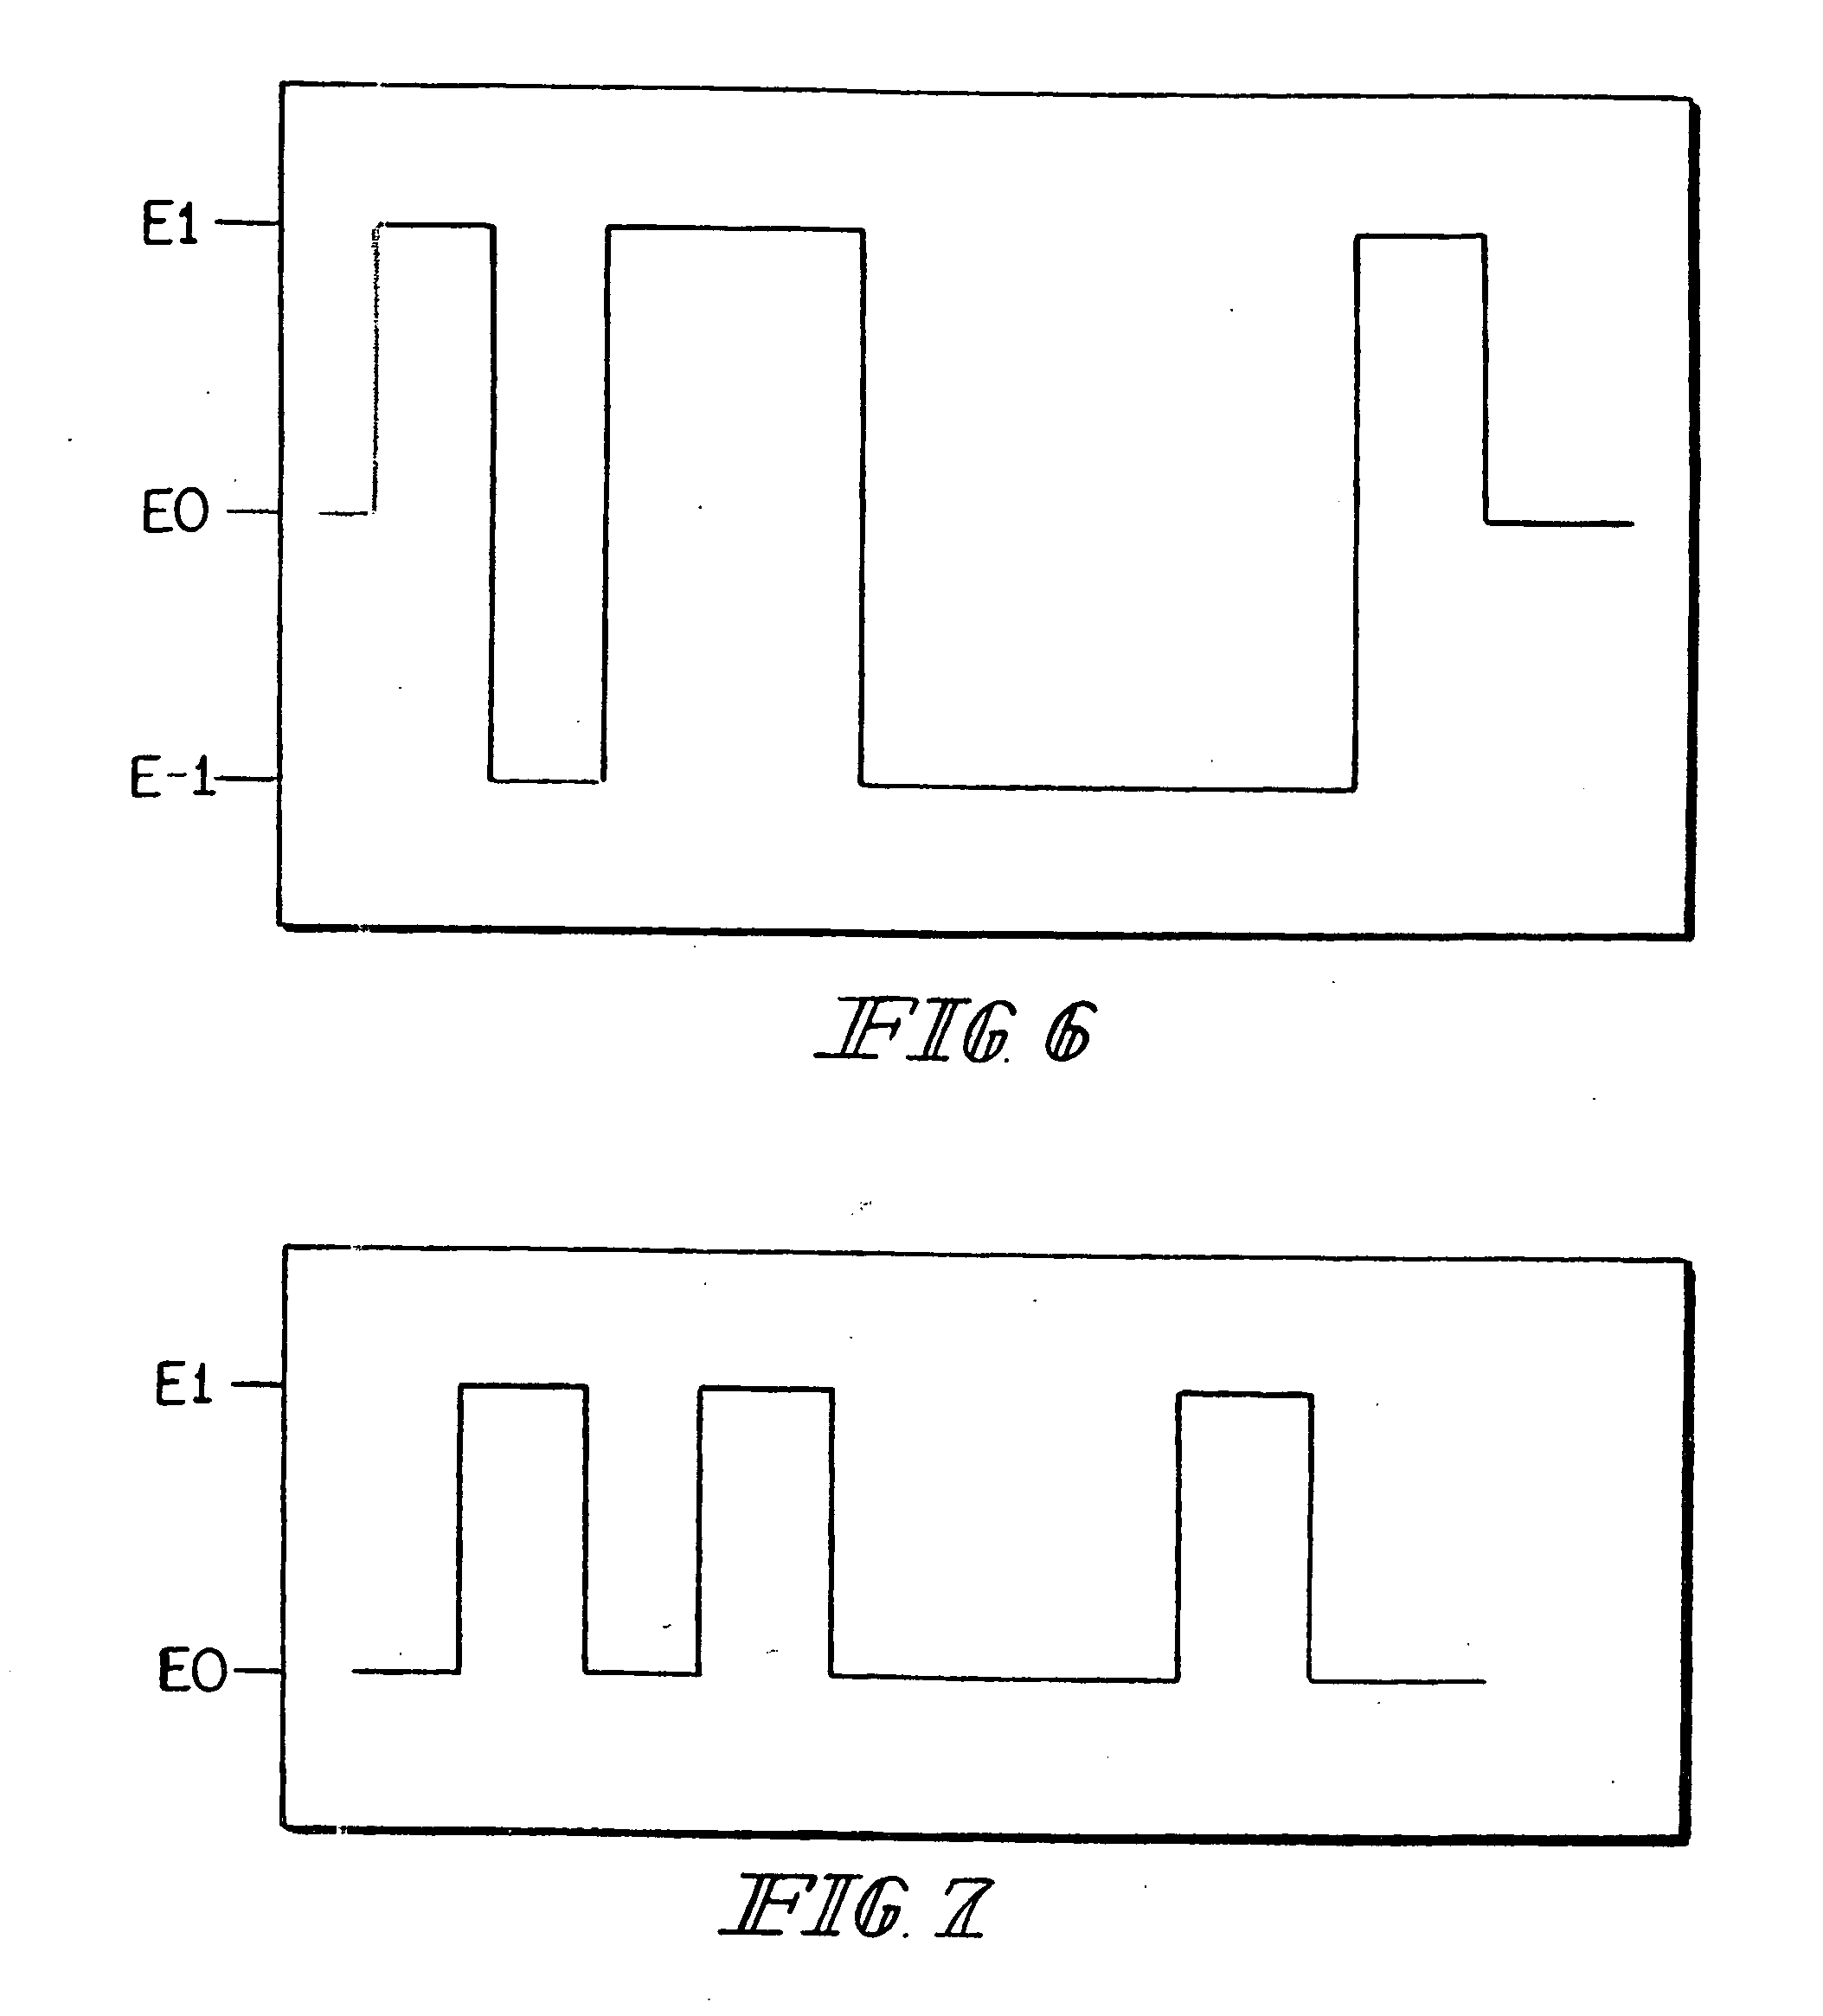 Electrochemical sensor and method for continuous analyte monitoring